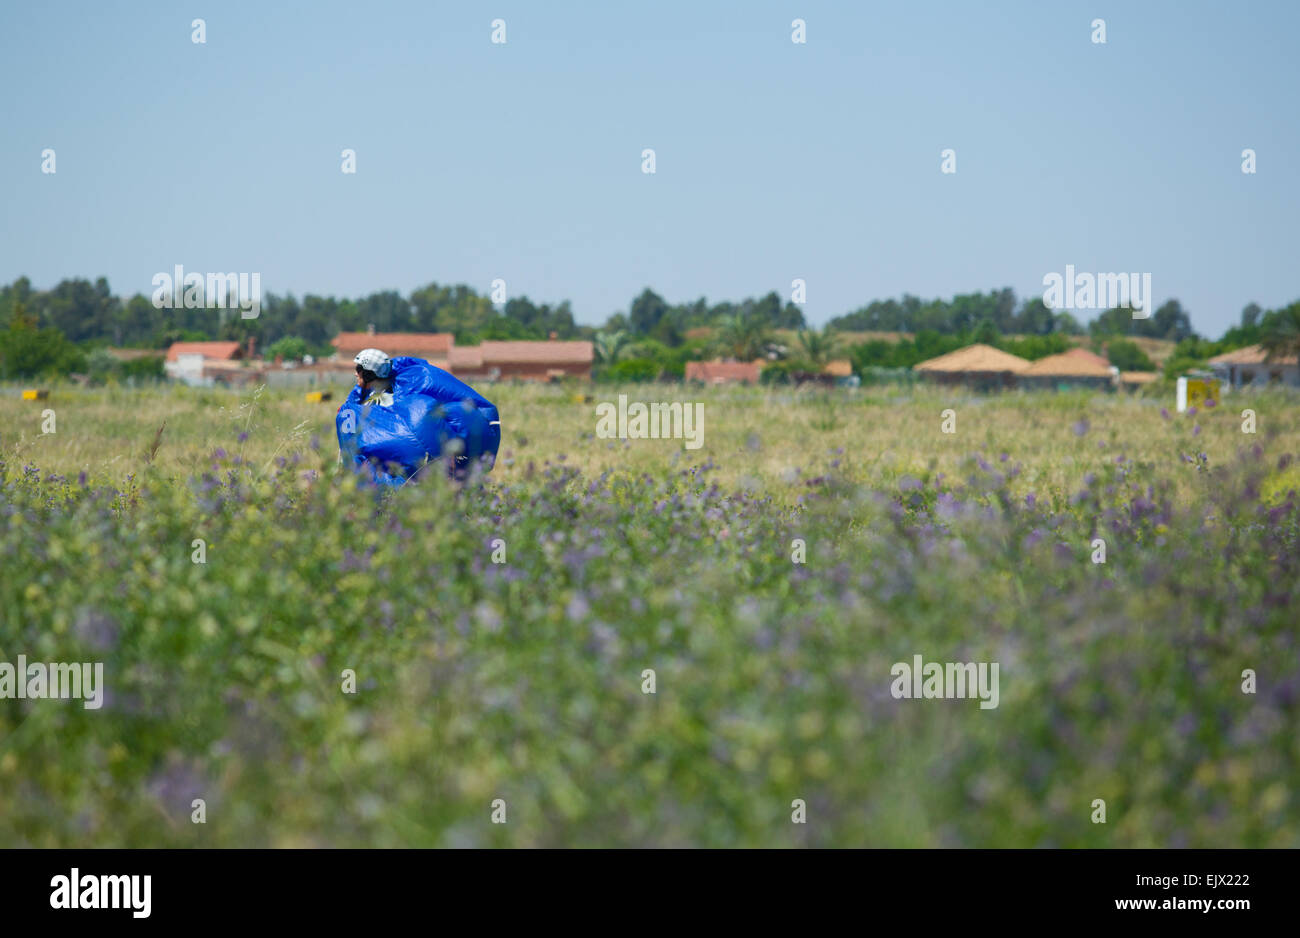 Skydiver jumper on ground carrying his unpacked blue parachute through medows Stock Photo